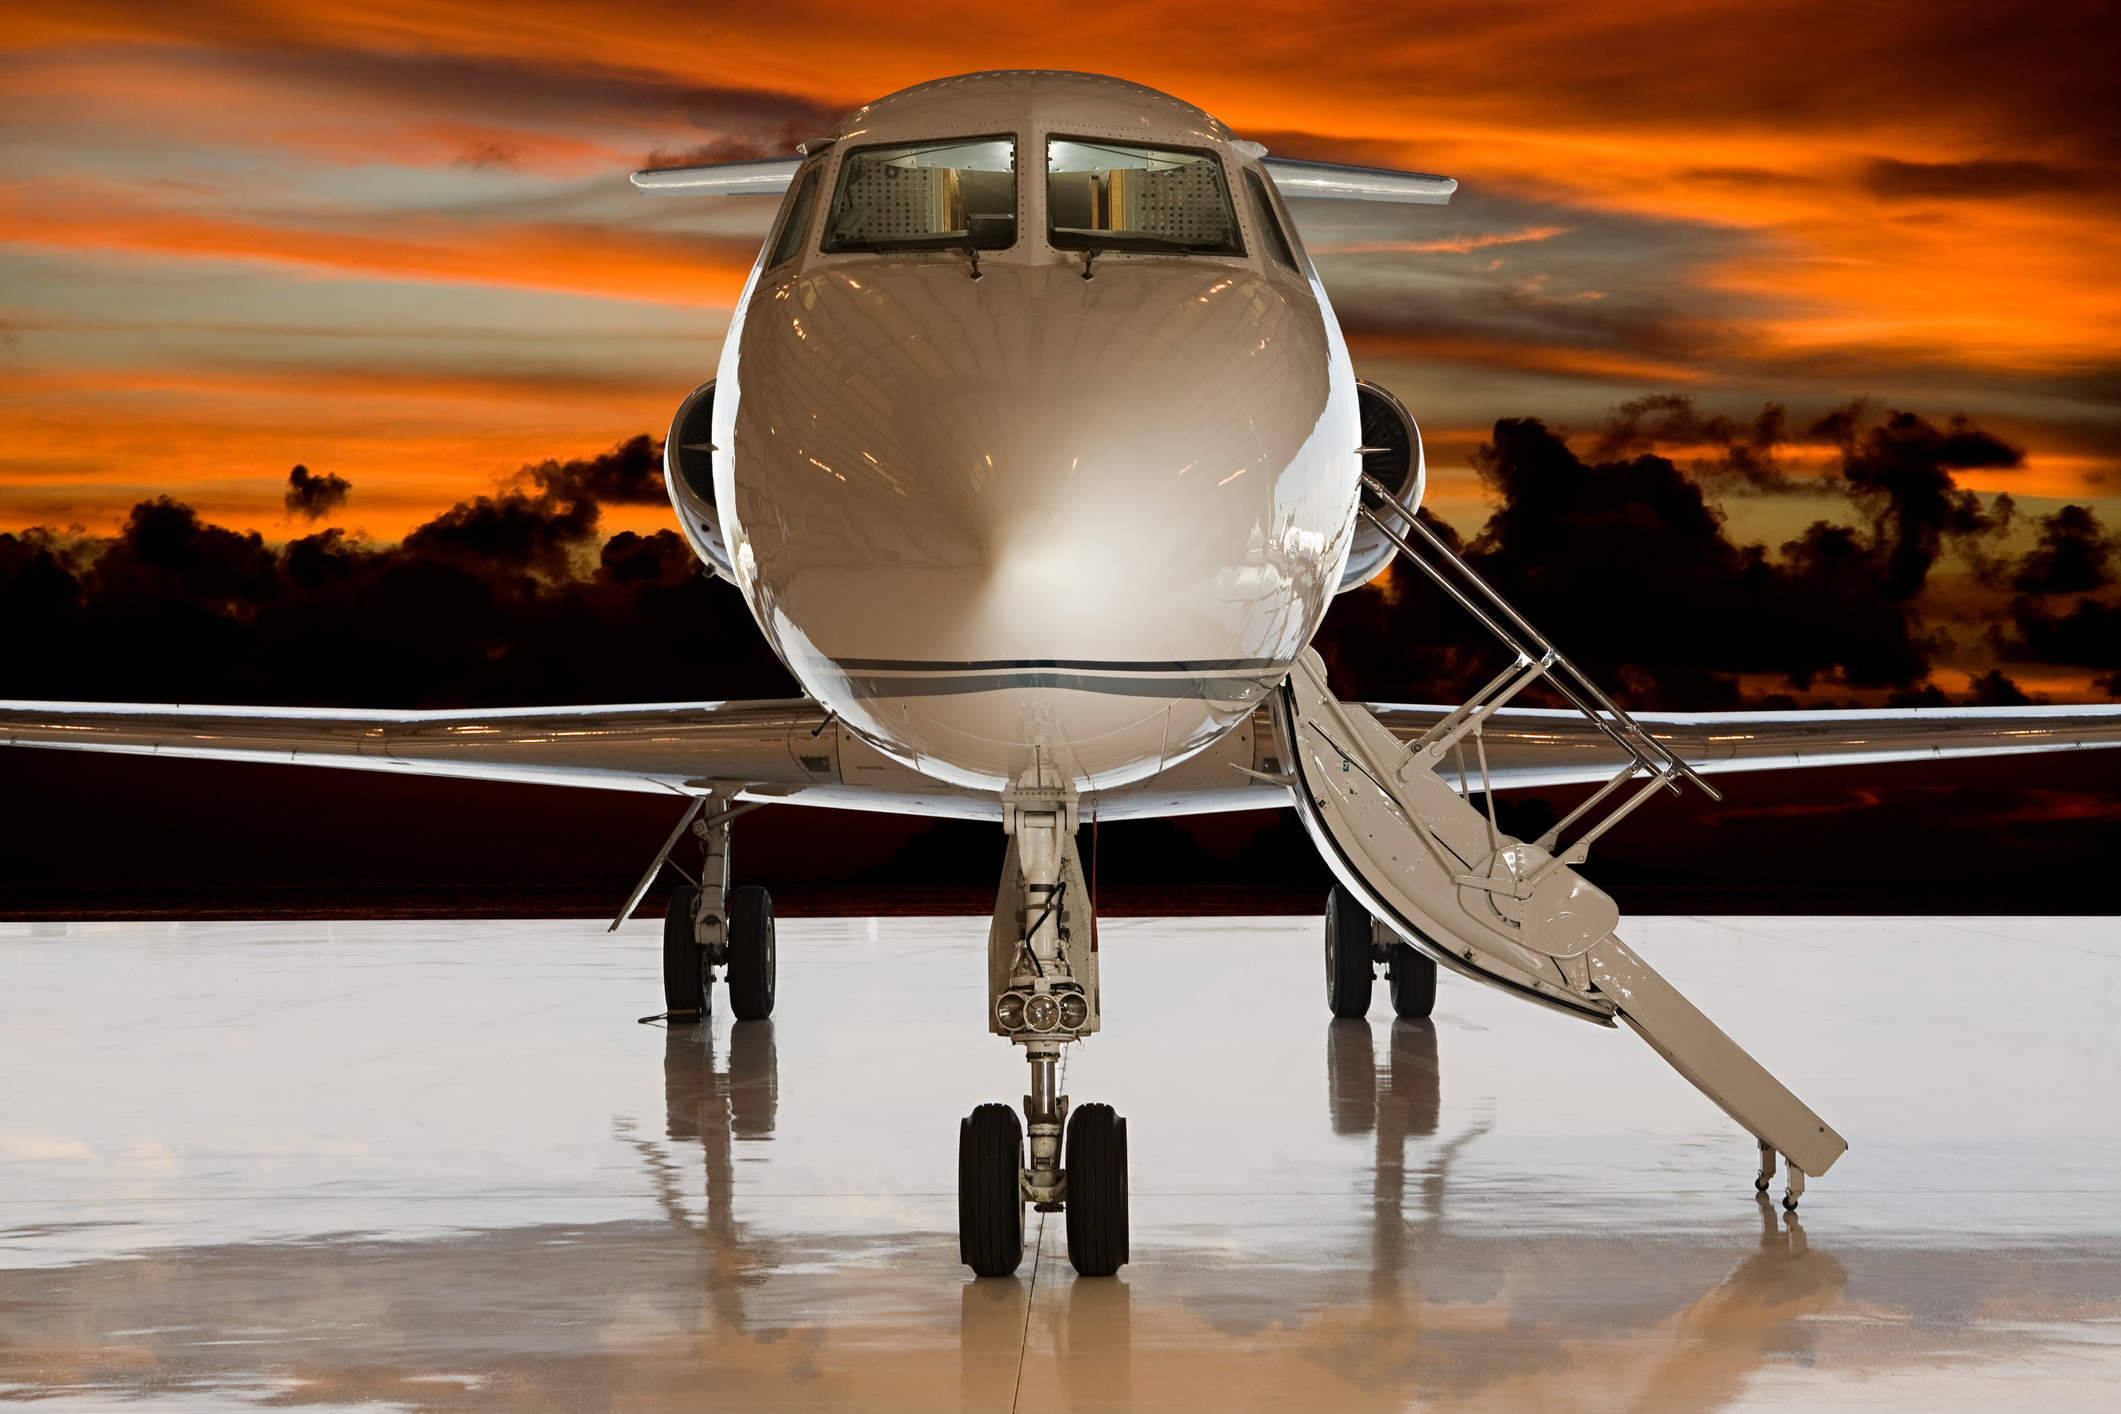 Online fraud increasing in private jet charter market, warns The ACA and EBAA